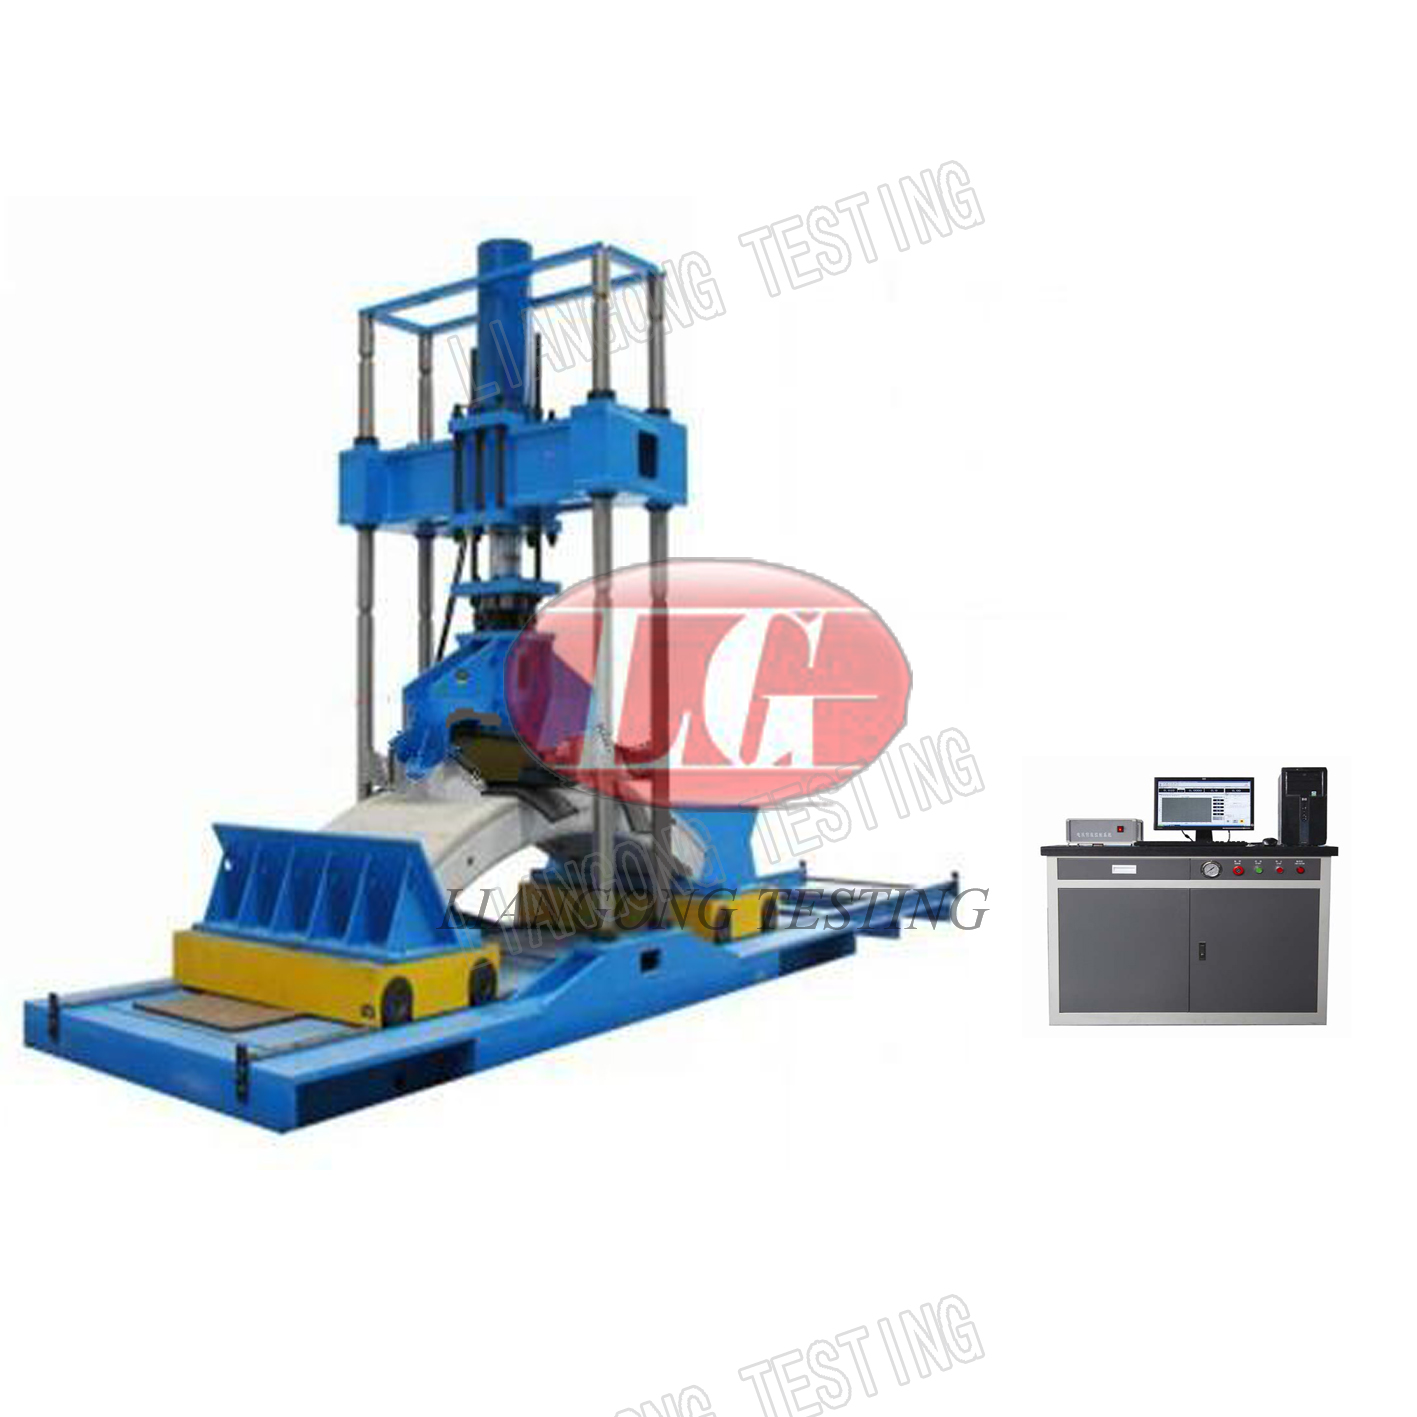 WGS-1000B Computer Control Reinforced Concrete Segments Bending and Pull Off Testing Machine